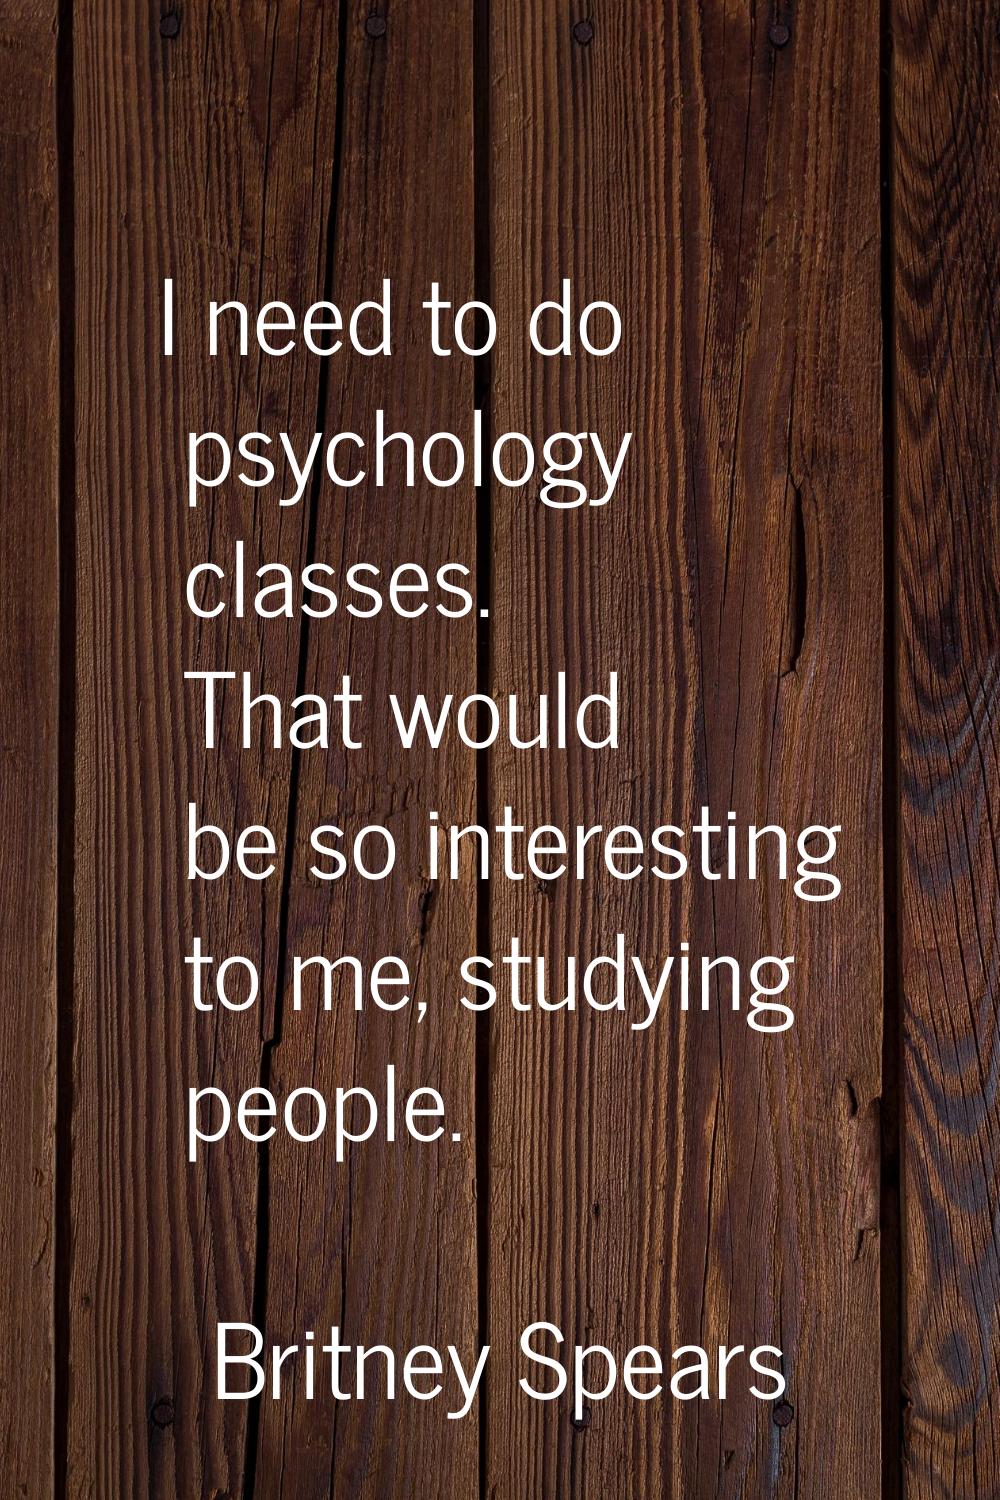 I need to do psychology classes. That would be so interesting to me, studying people.